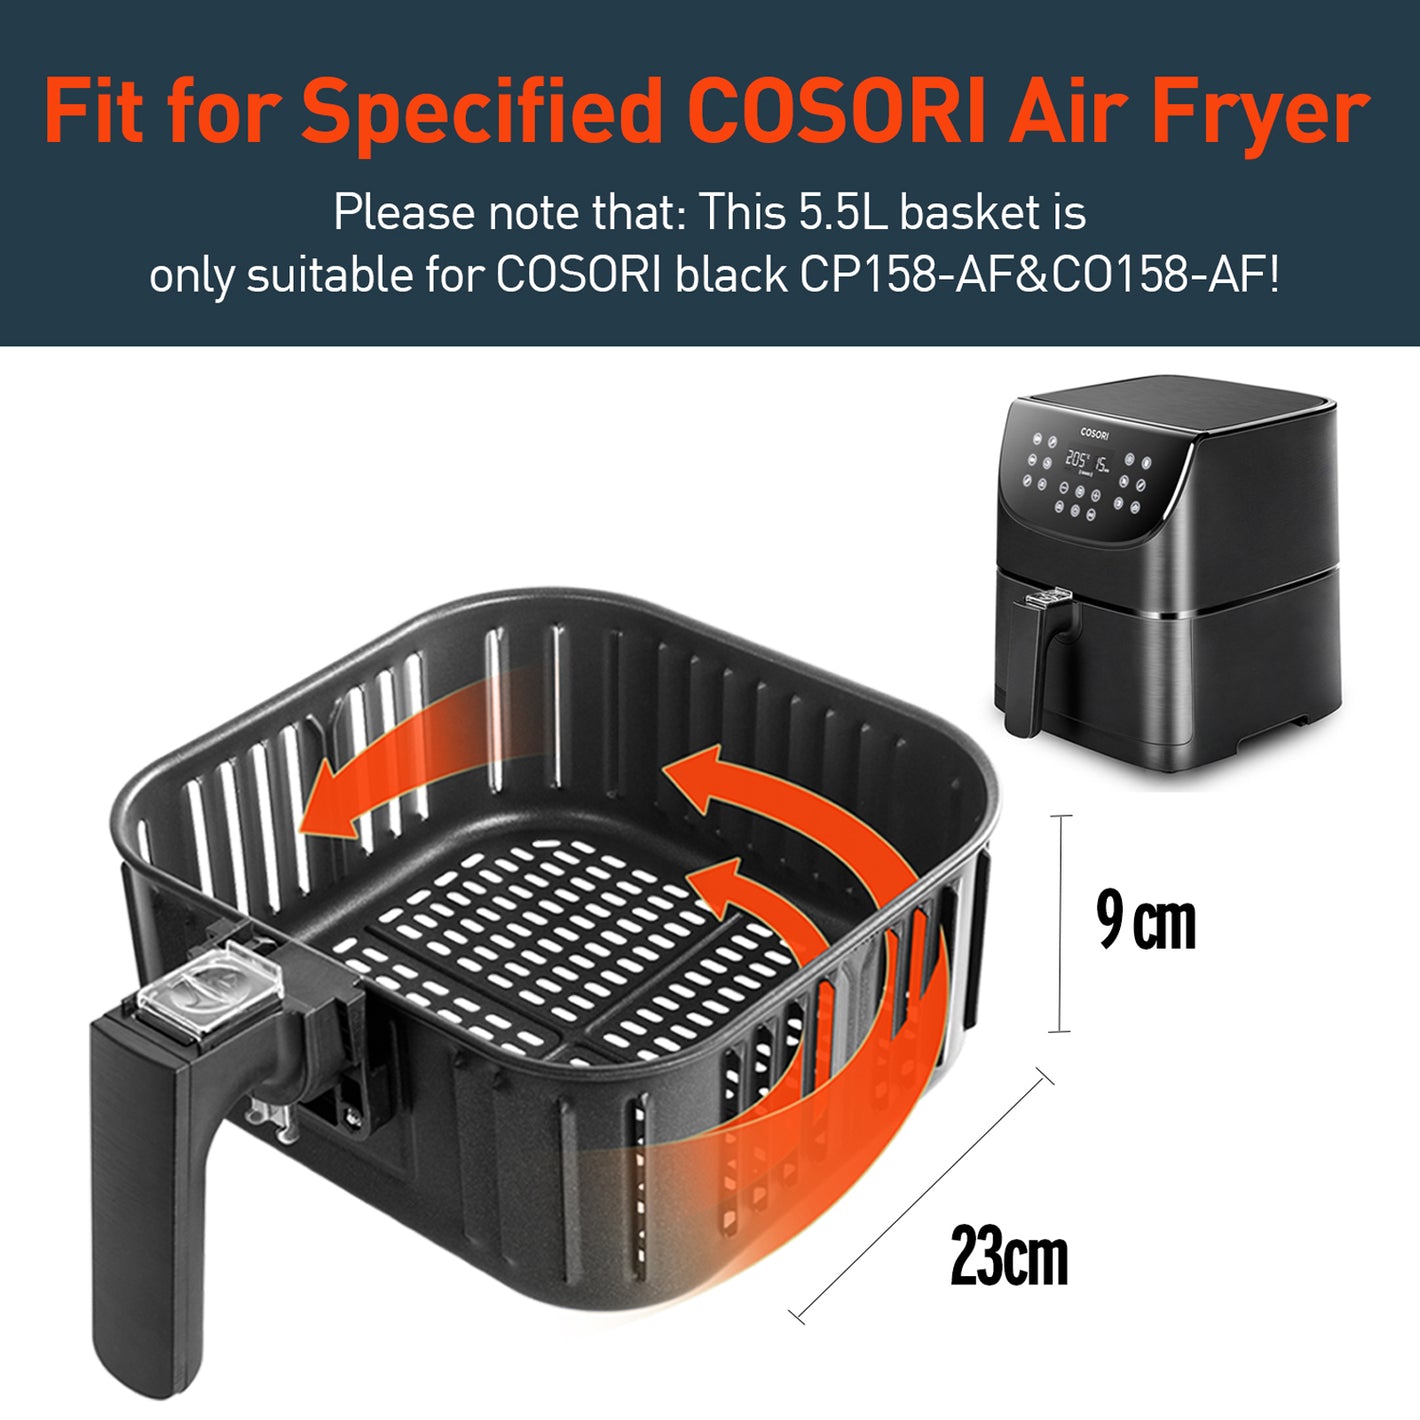 Fit for Specified COSORI Air Fryer  Please note that: This 5.5L basket is only suitable for COSORI black CP158-AF&CO158-AF!